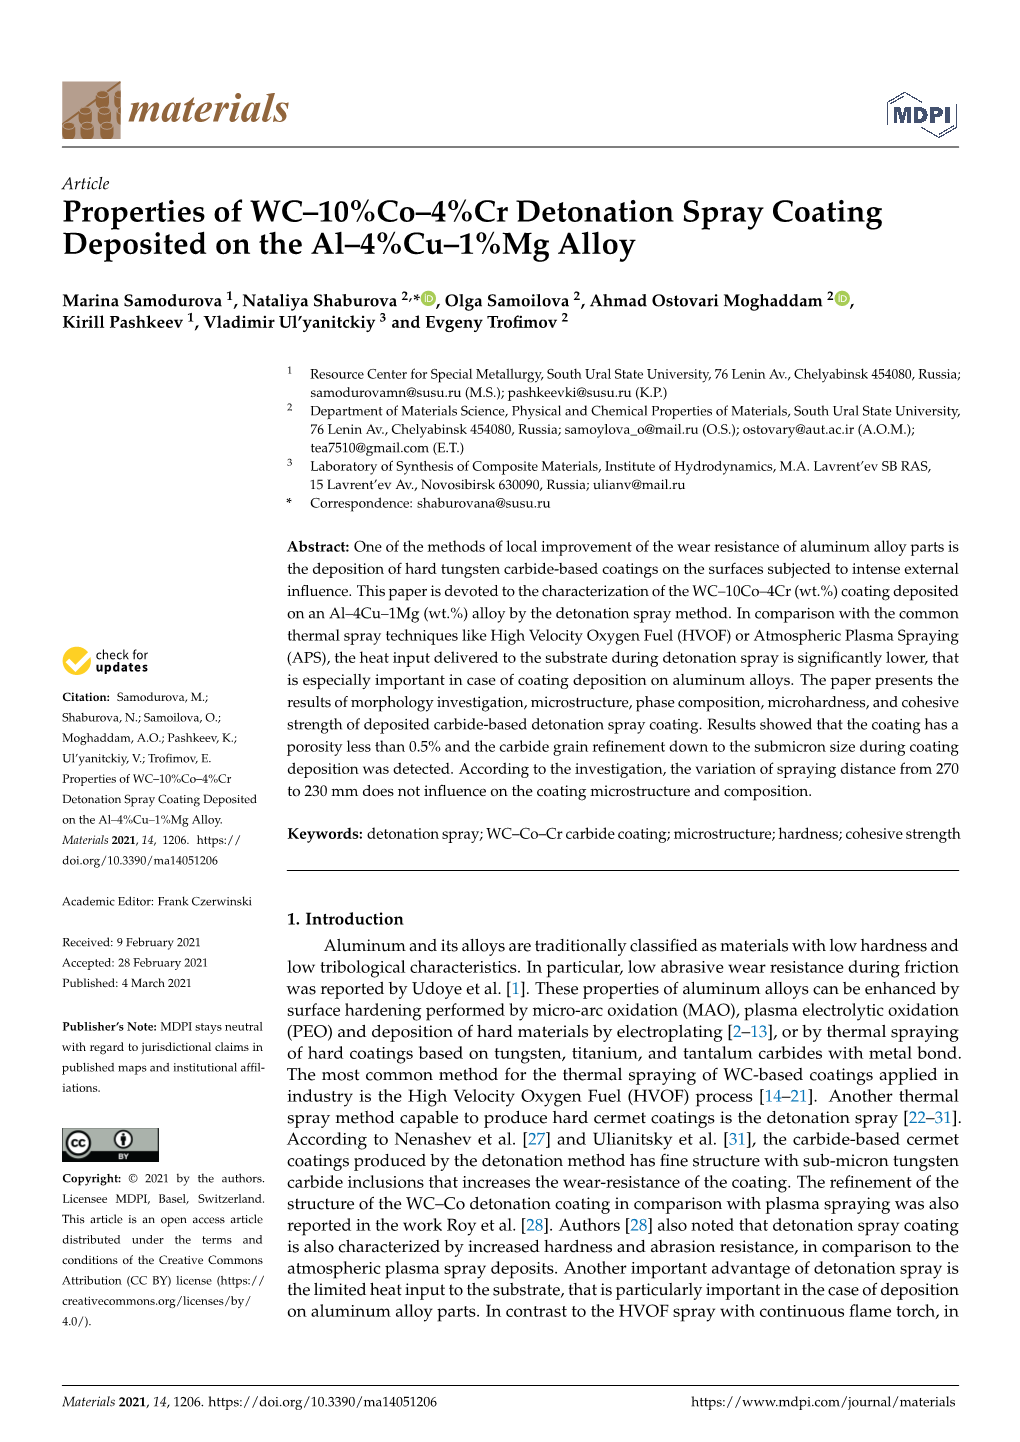 Properties of WC–10%Co–4%Cr Detonation Spray Coating Deposited on the Al–4%Cu–1%Mg Alloy